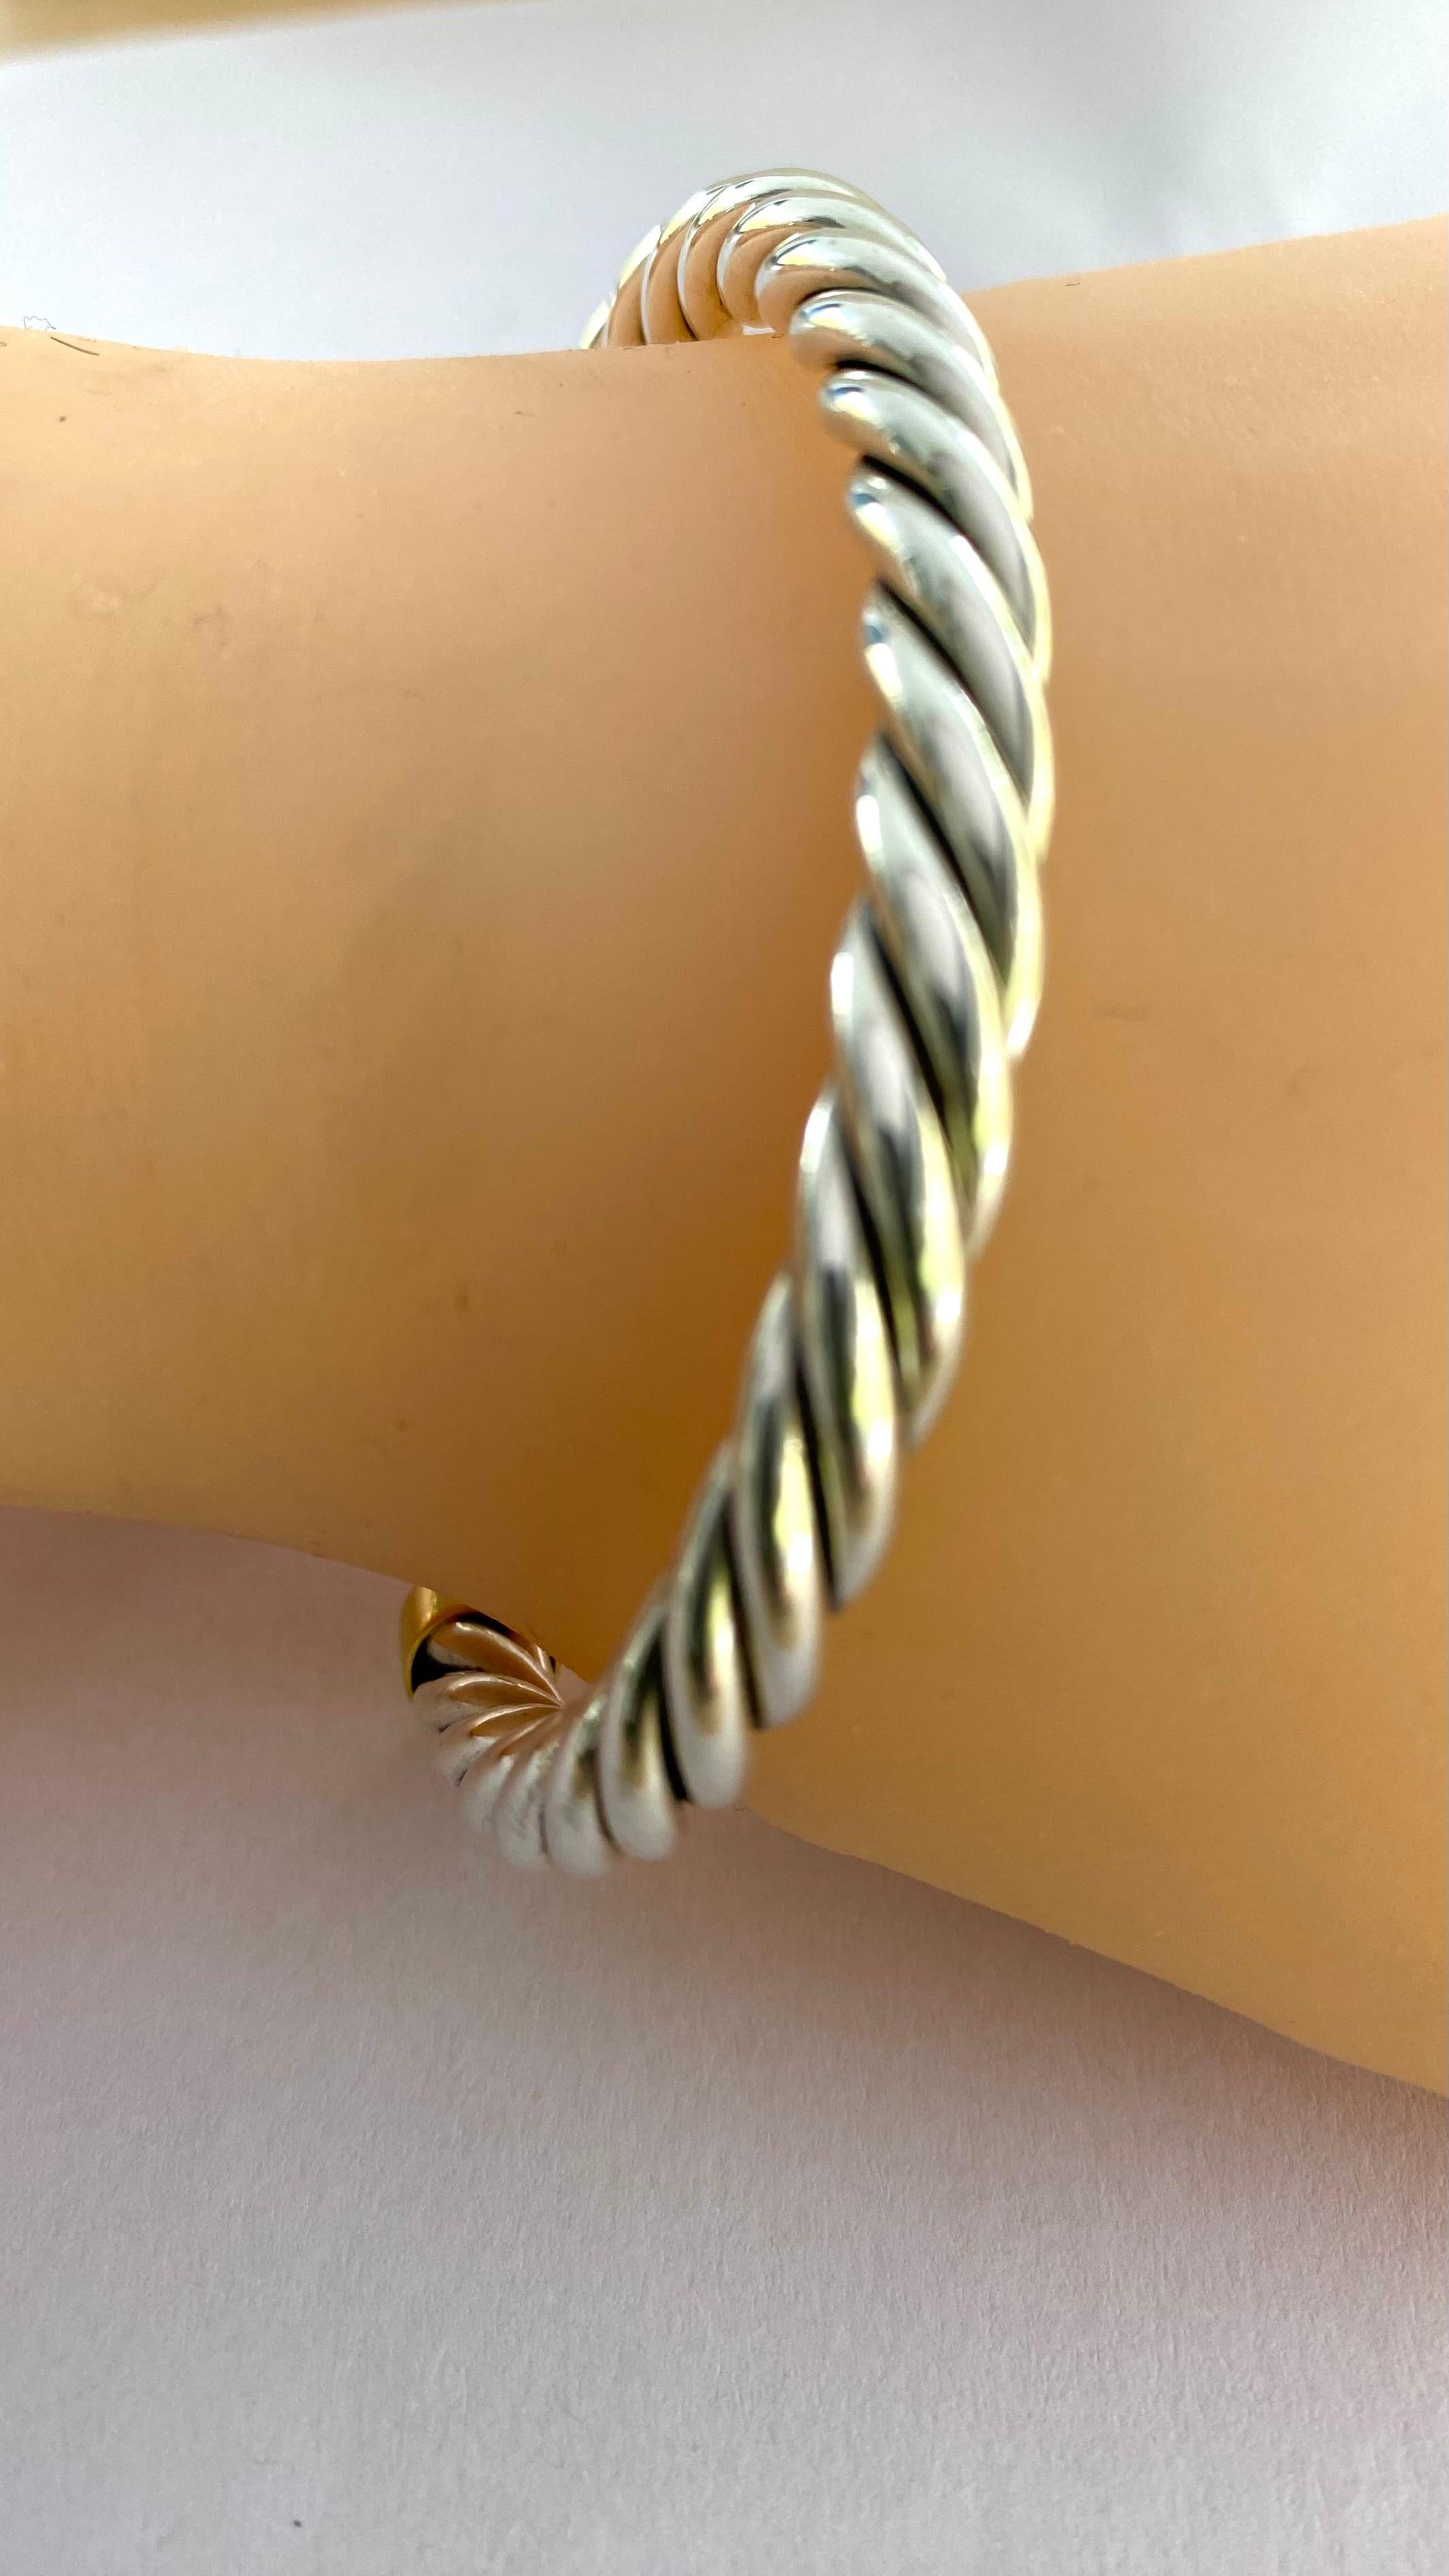 Indulge in the timeless elegance of this exquisite vintage David Yurman bracelet. Crafted in the 20th century, this piece exemplifies classic luxury with its intricate braided design. Meticulously constructed from premium sterling silver and